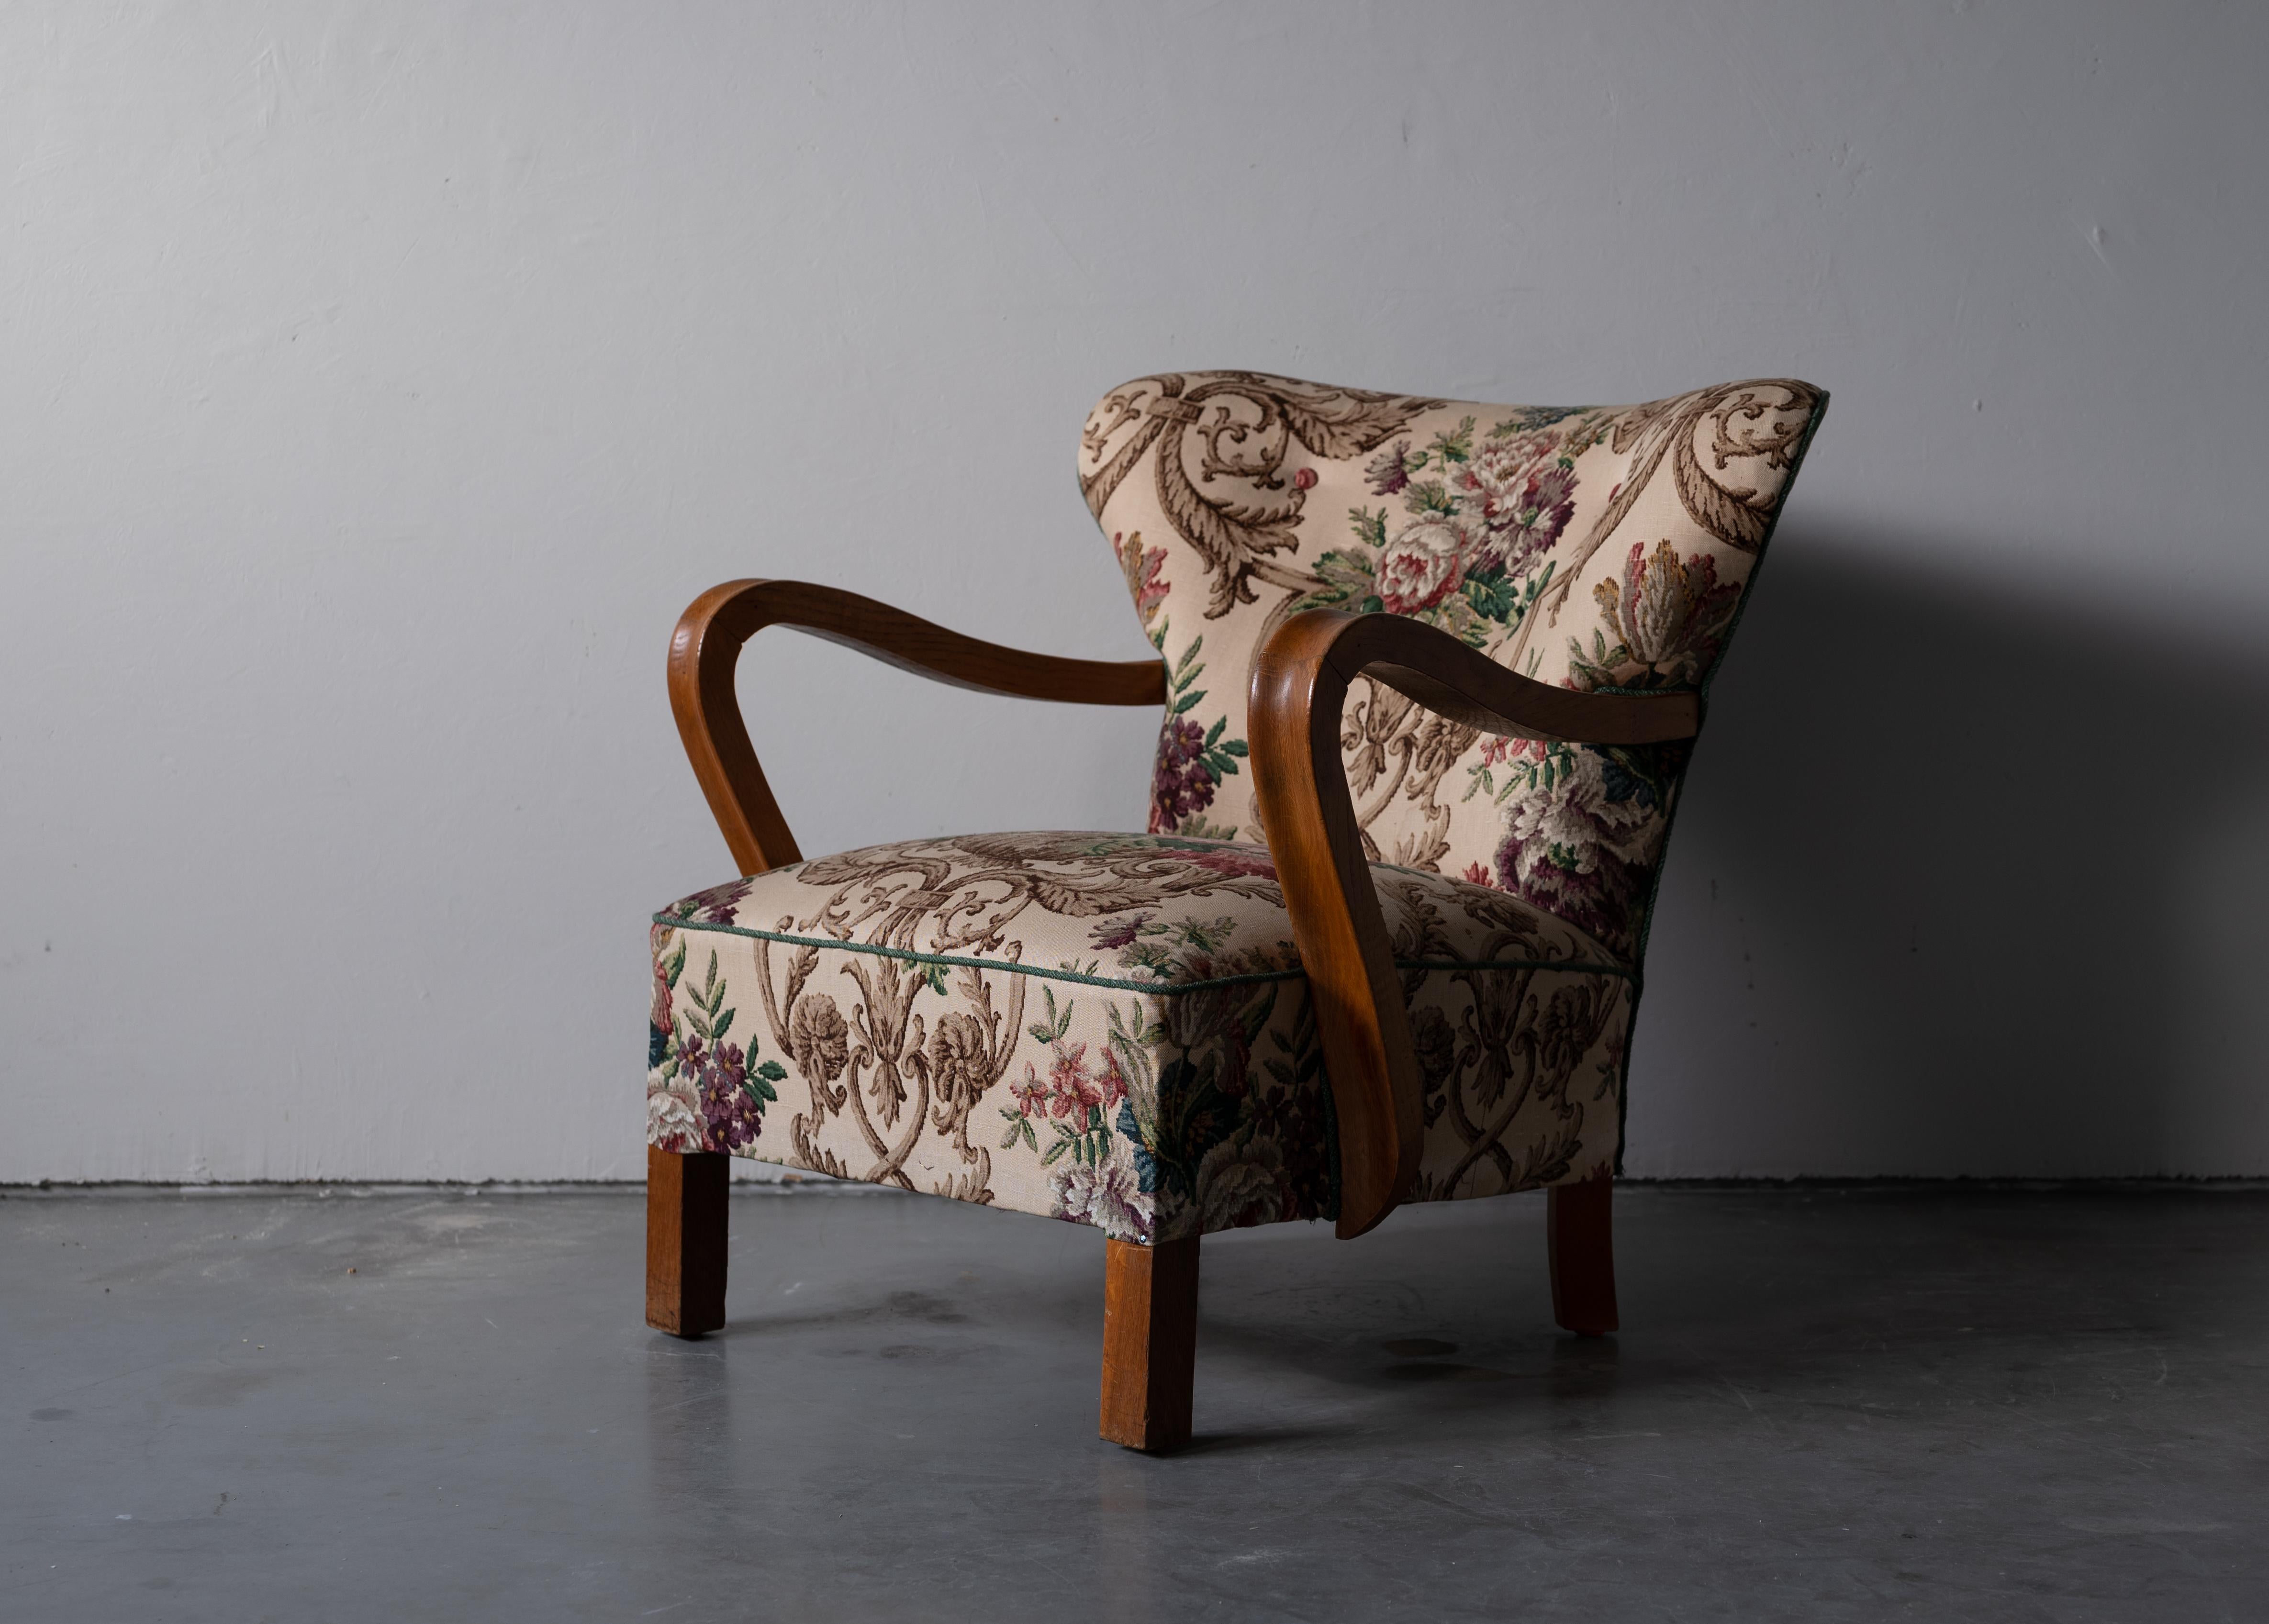 An organic lounge chair, designed and produced in Denmark, 1940s. 

Stained beech, vintage floral upholstery.

Other designers of the period include Jean Royère, Gio Ponti, Flemming Lassen, Philip Arctander, and Arnold Madsen.